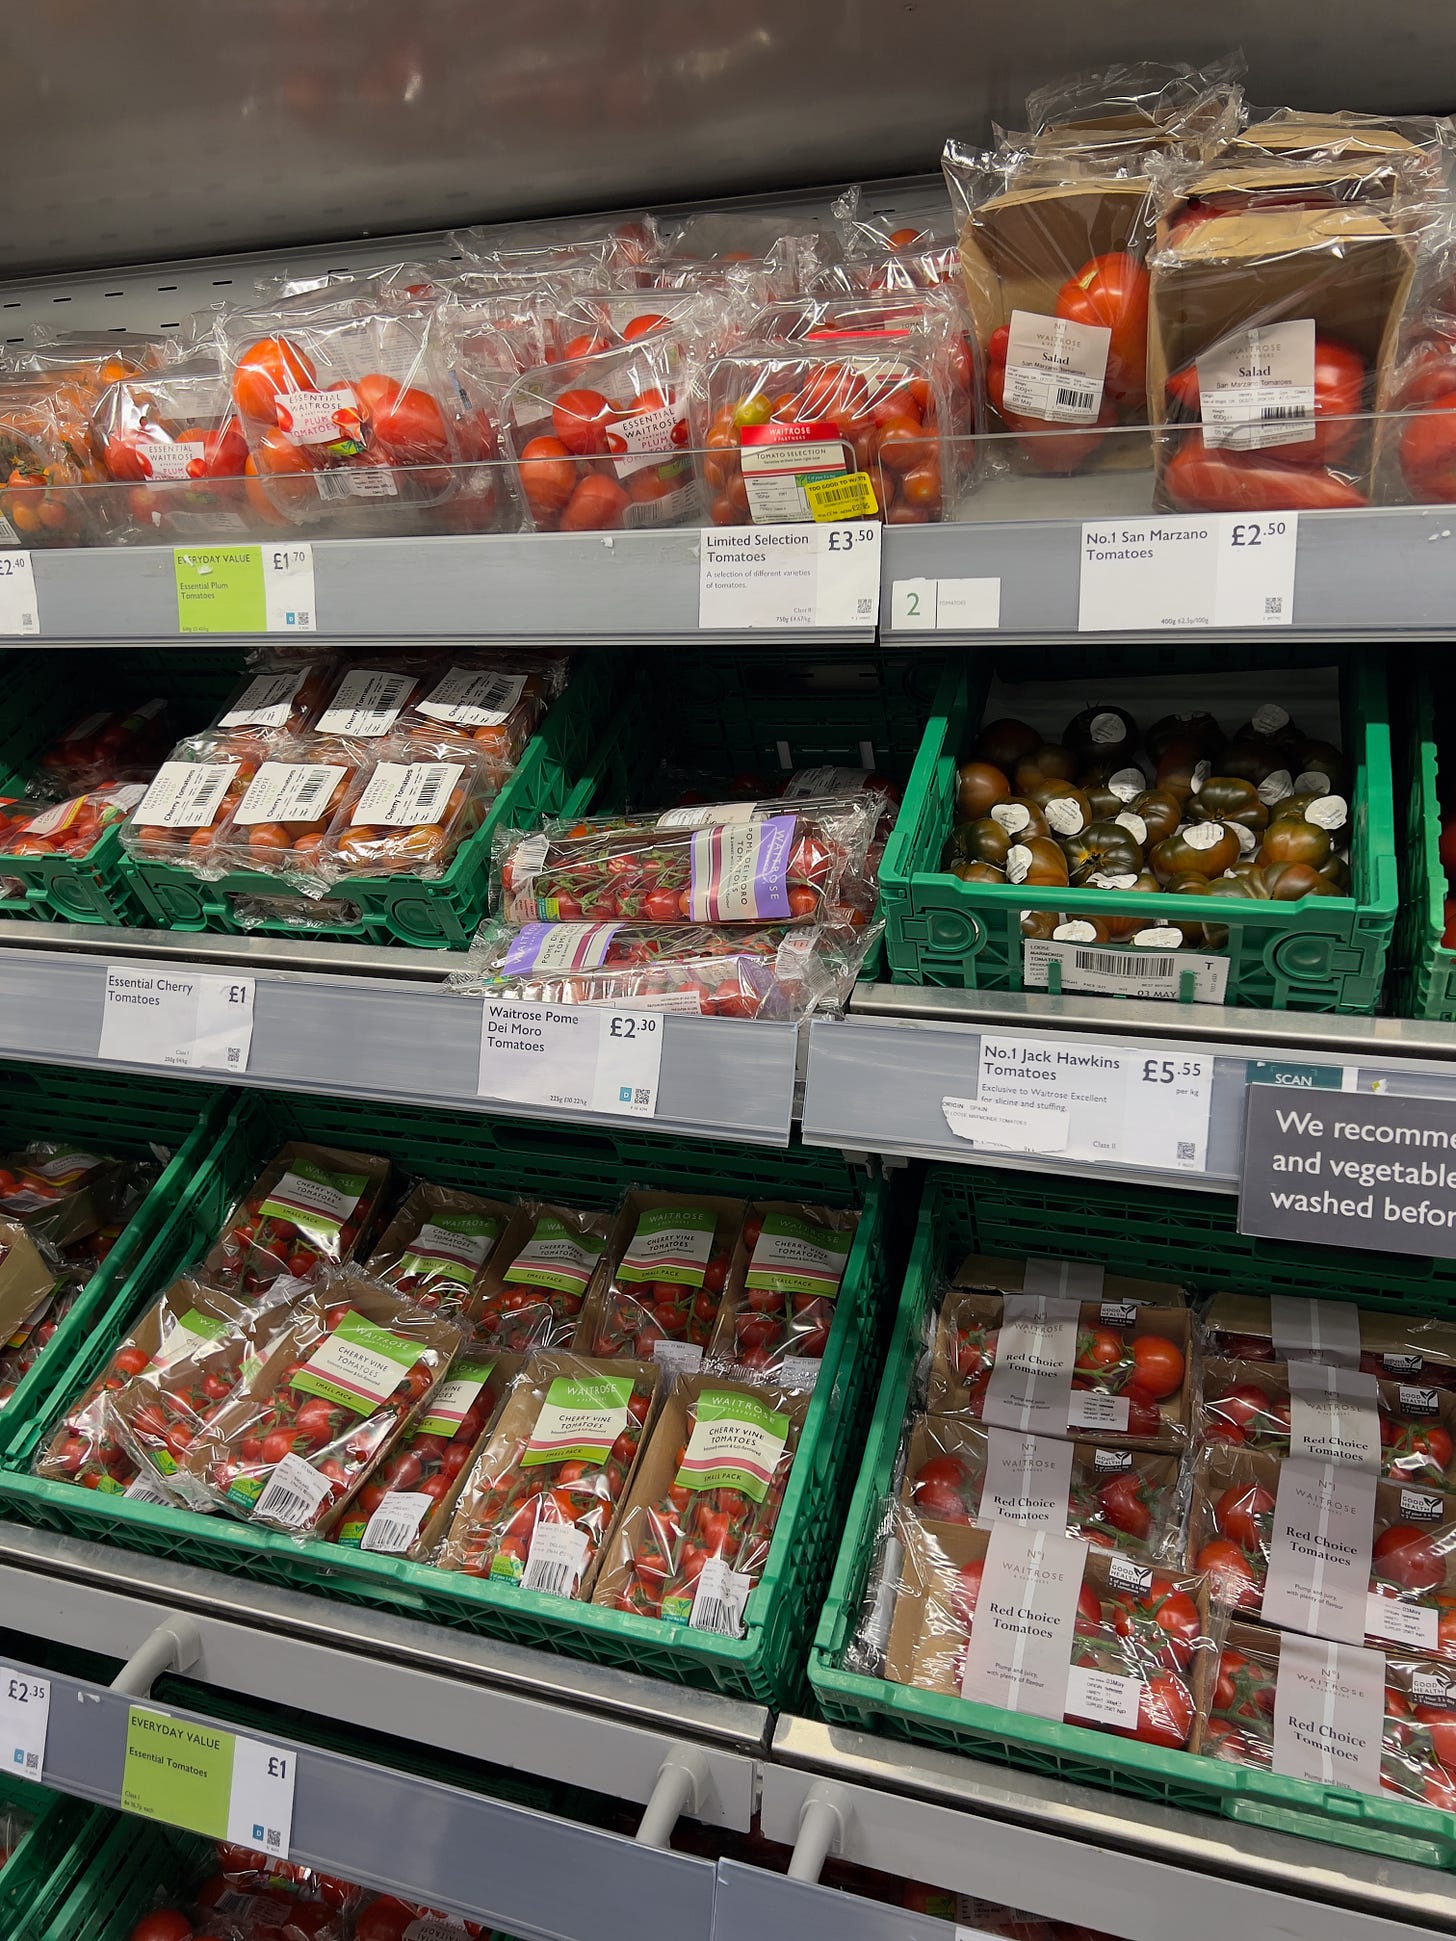 Picture of a variety of tomatoes packaged in single use plastic in Waitrose Supermarket, UK